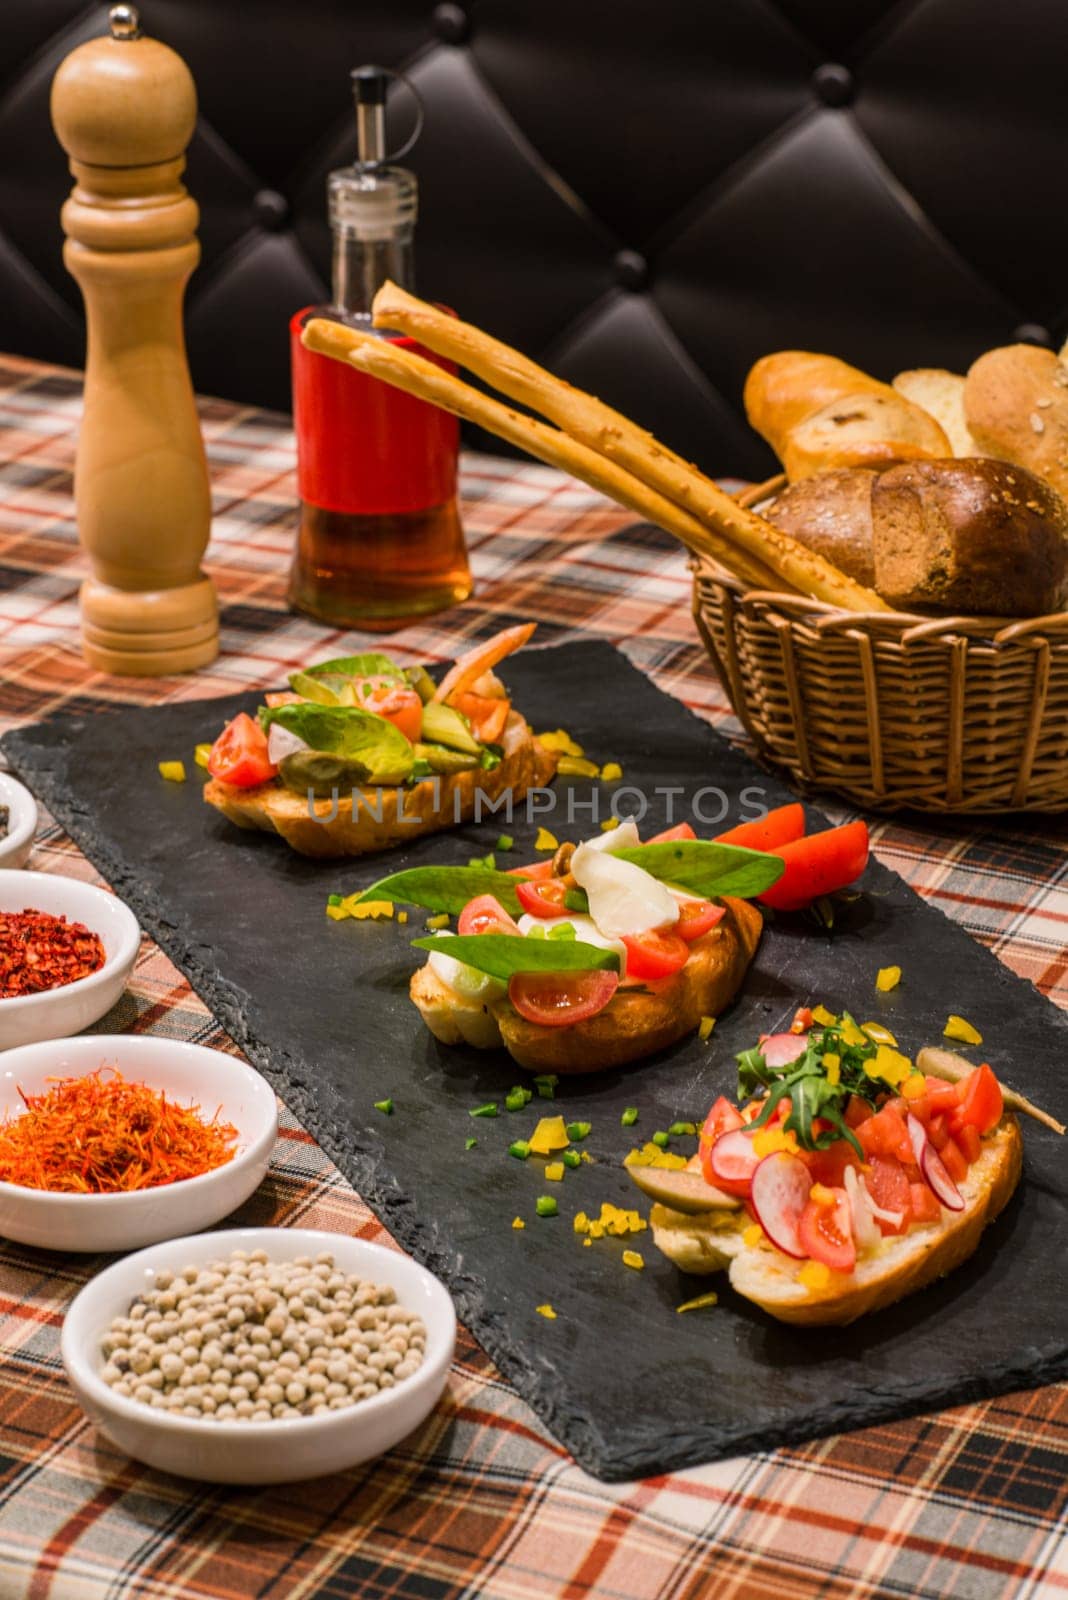 A closeup of serving table with tasty sandwiches or bruschetta with vegetables and spices on black board